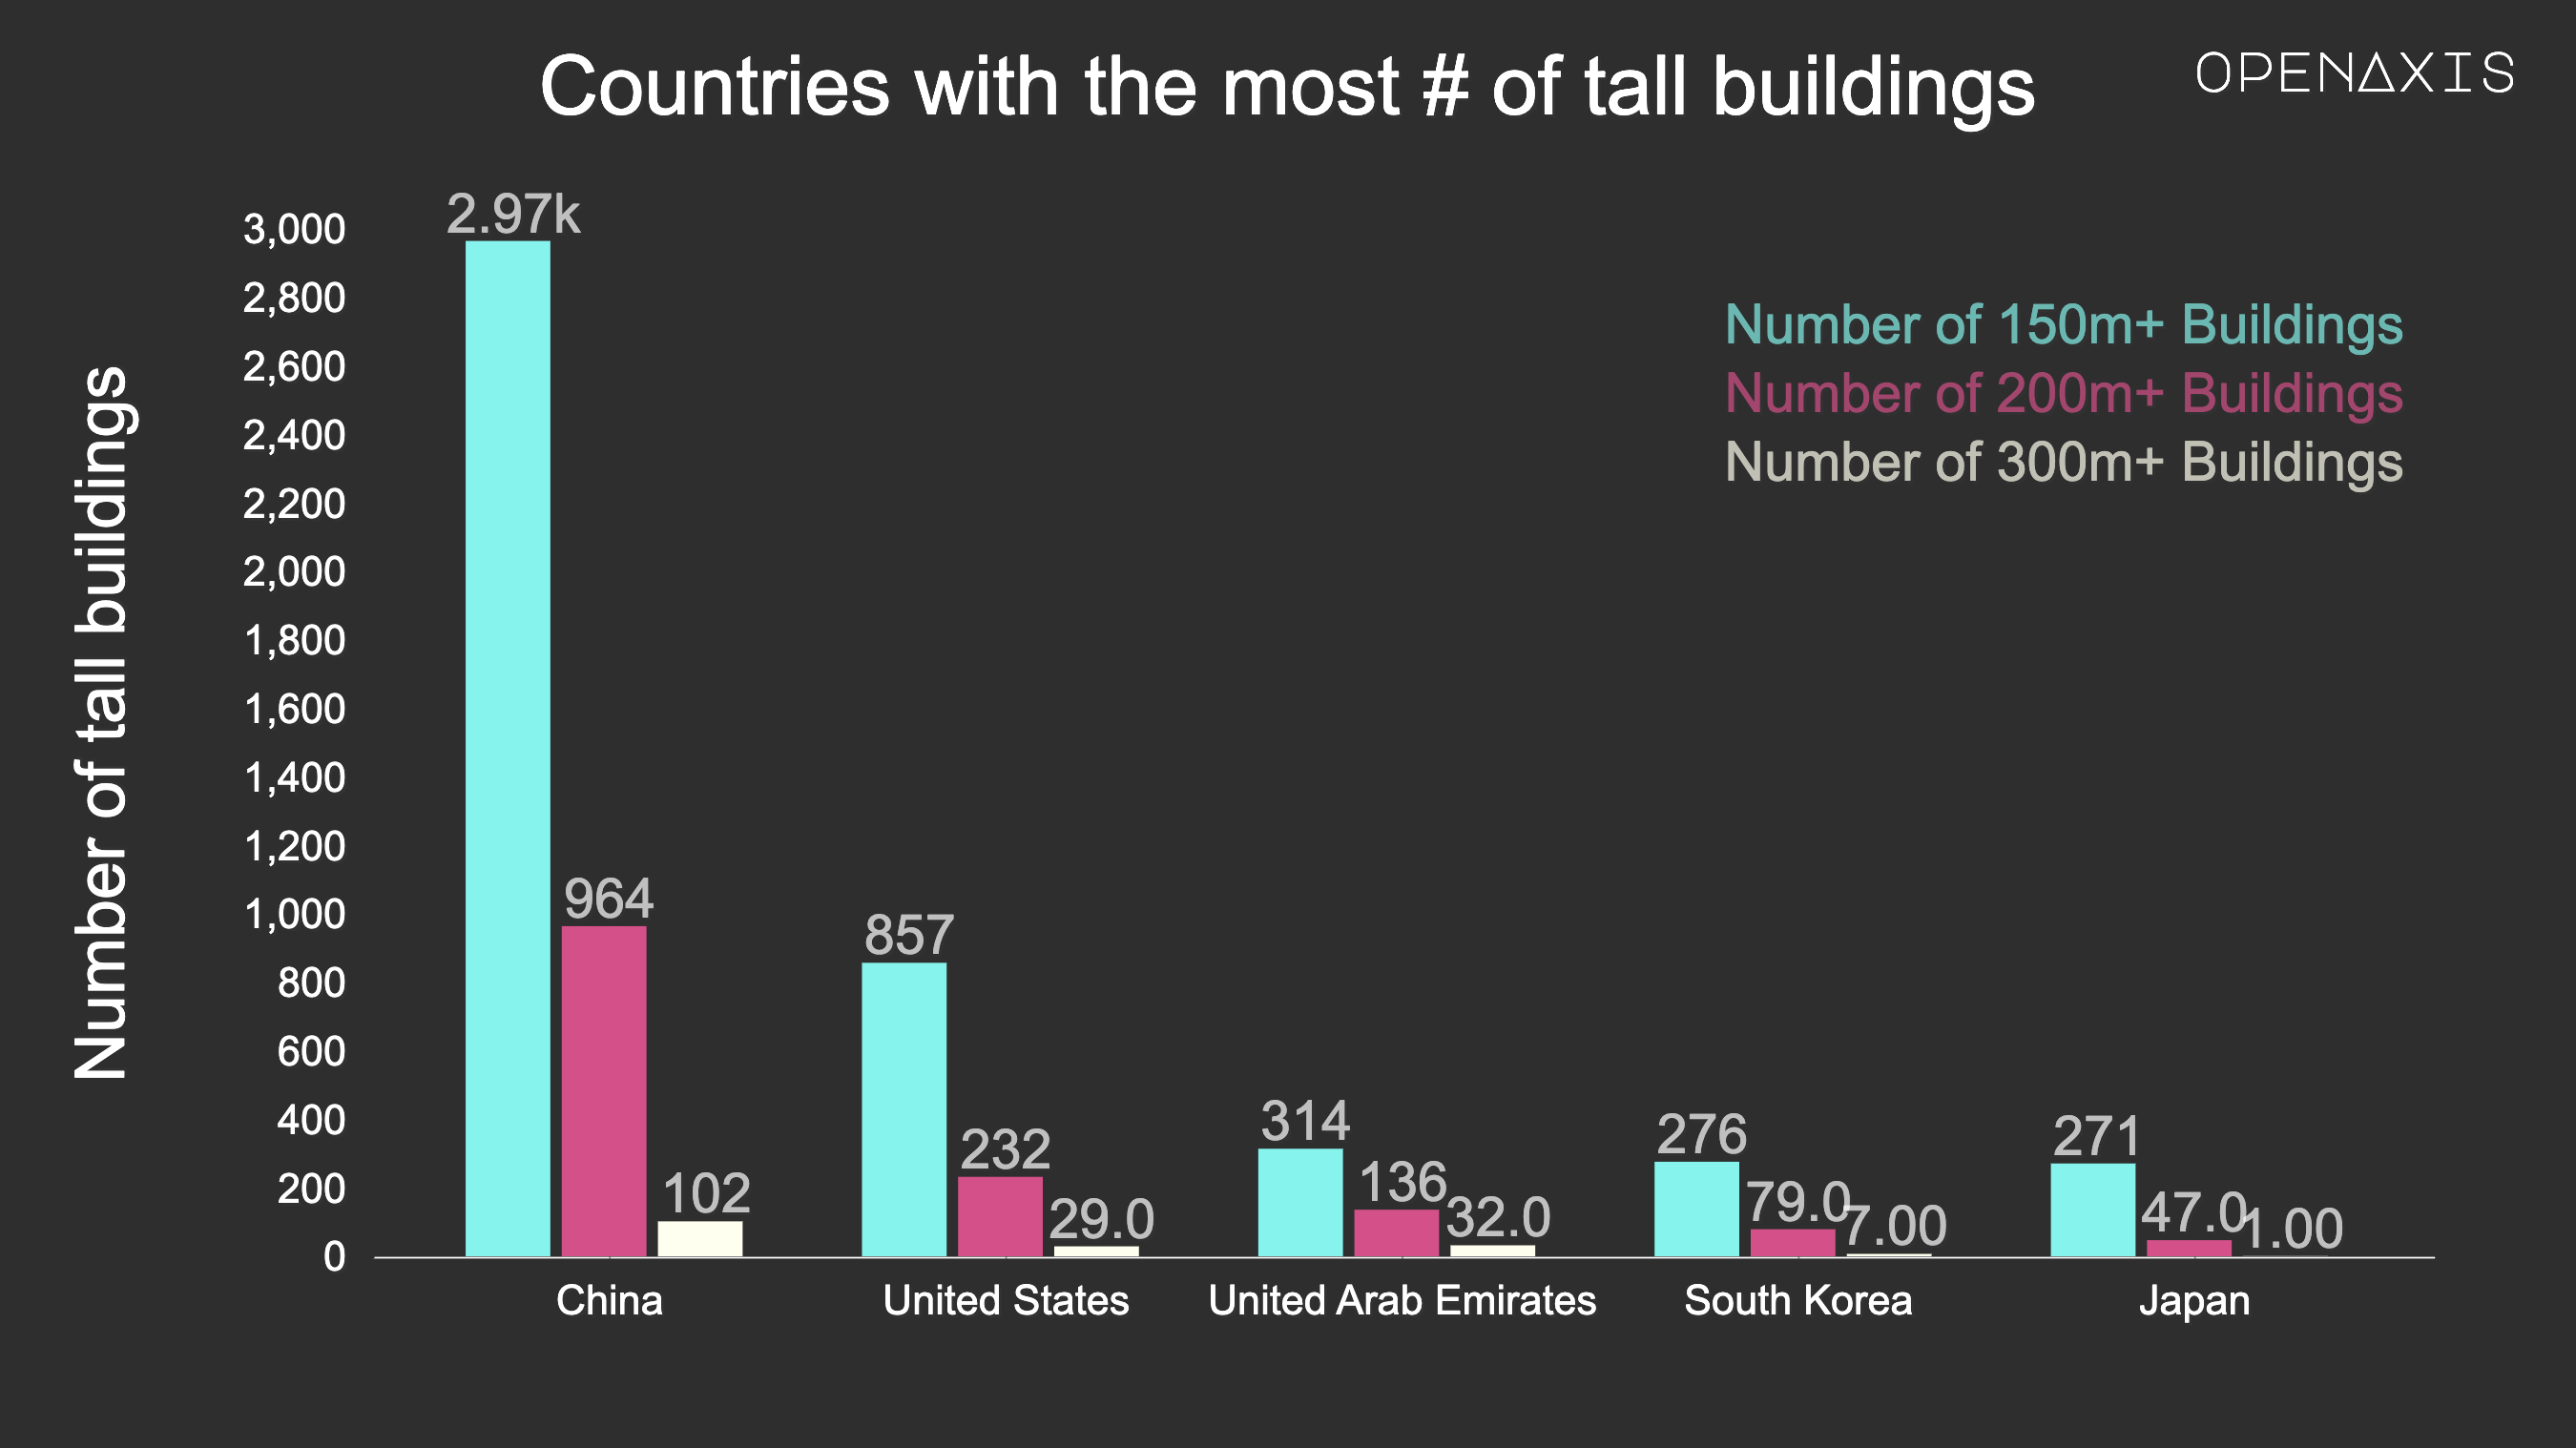 "Countries with the most # of tall buildings"